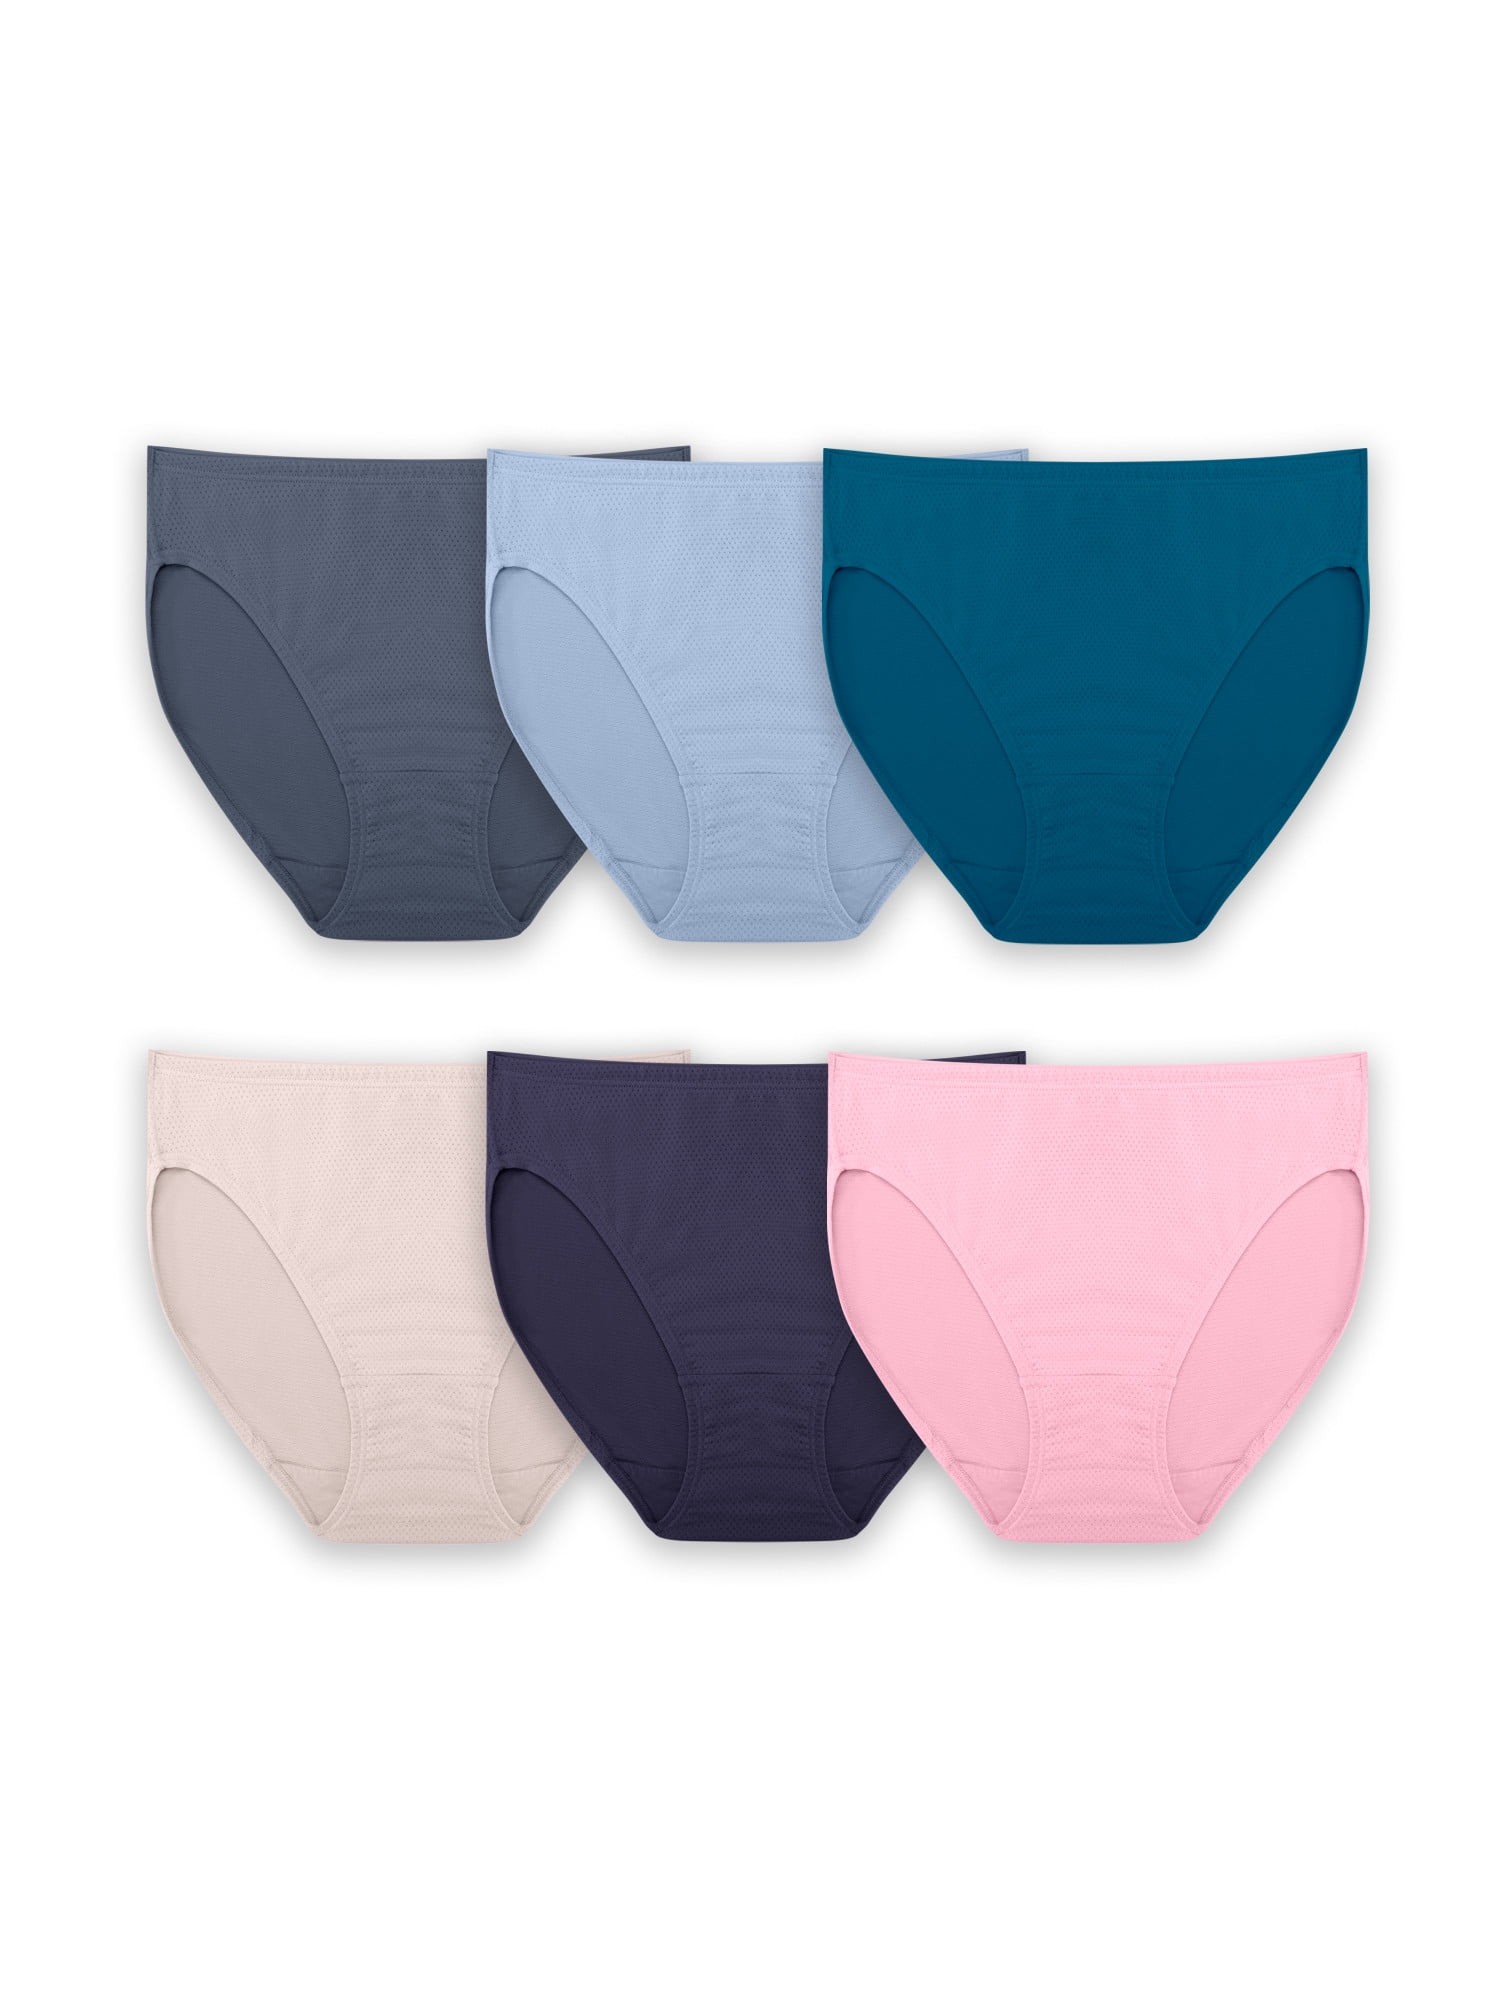 Fruit Of The Loom Women's 6pk Classic Briefs - Colors May Vary